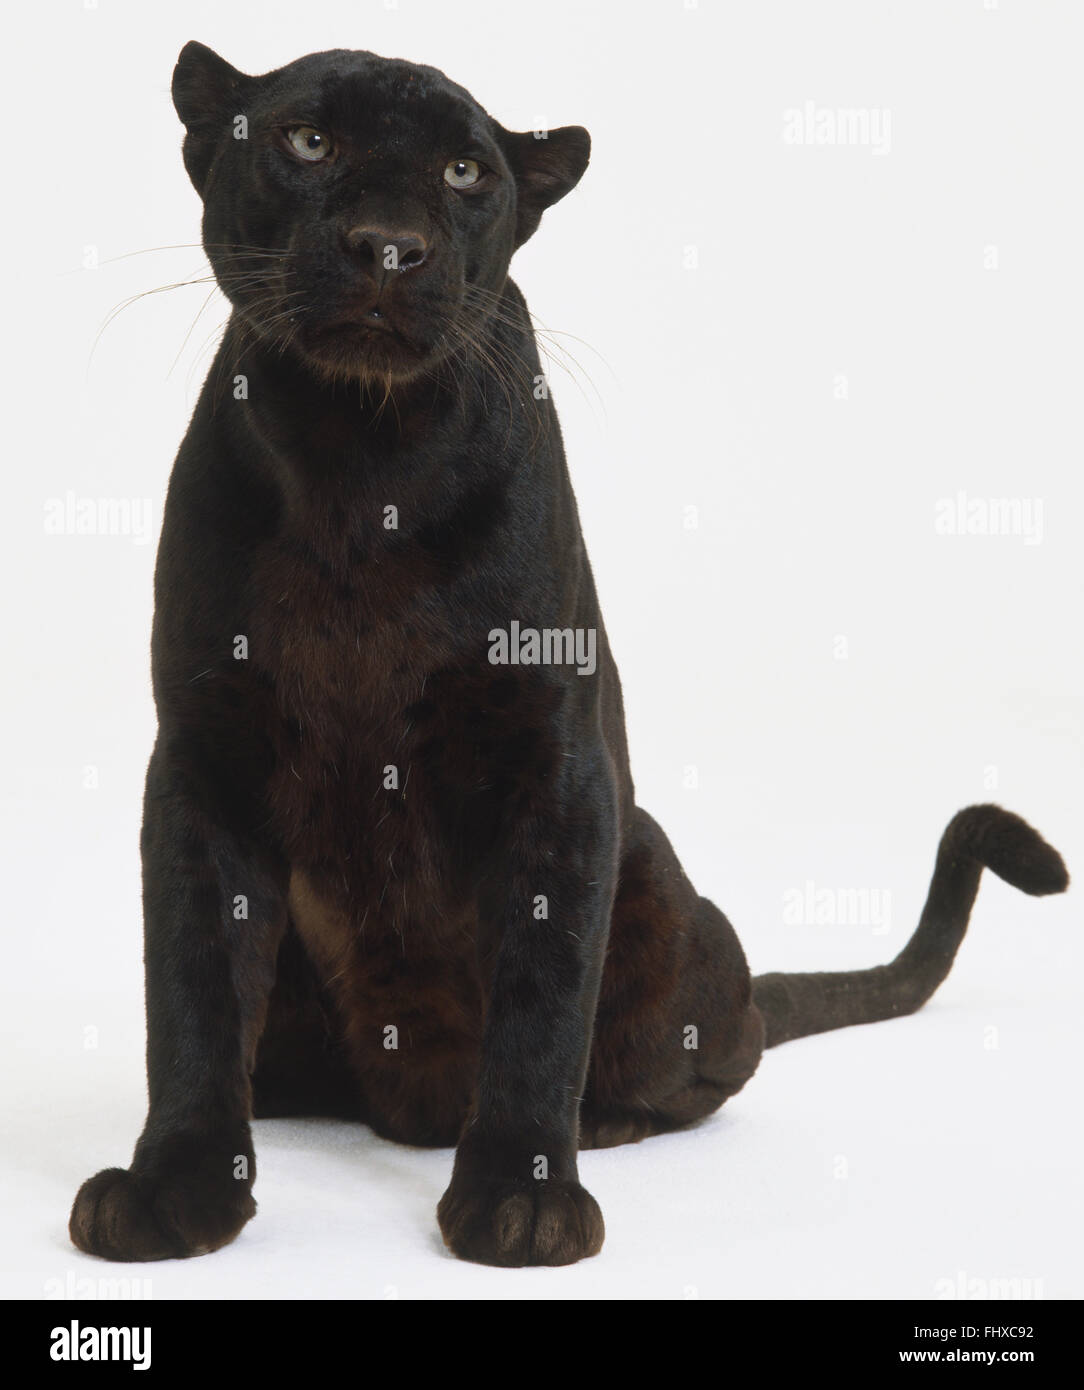 Seated Black Panther (Panthera pardus), front view. Stock Photo